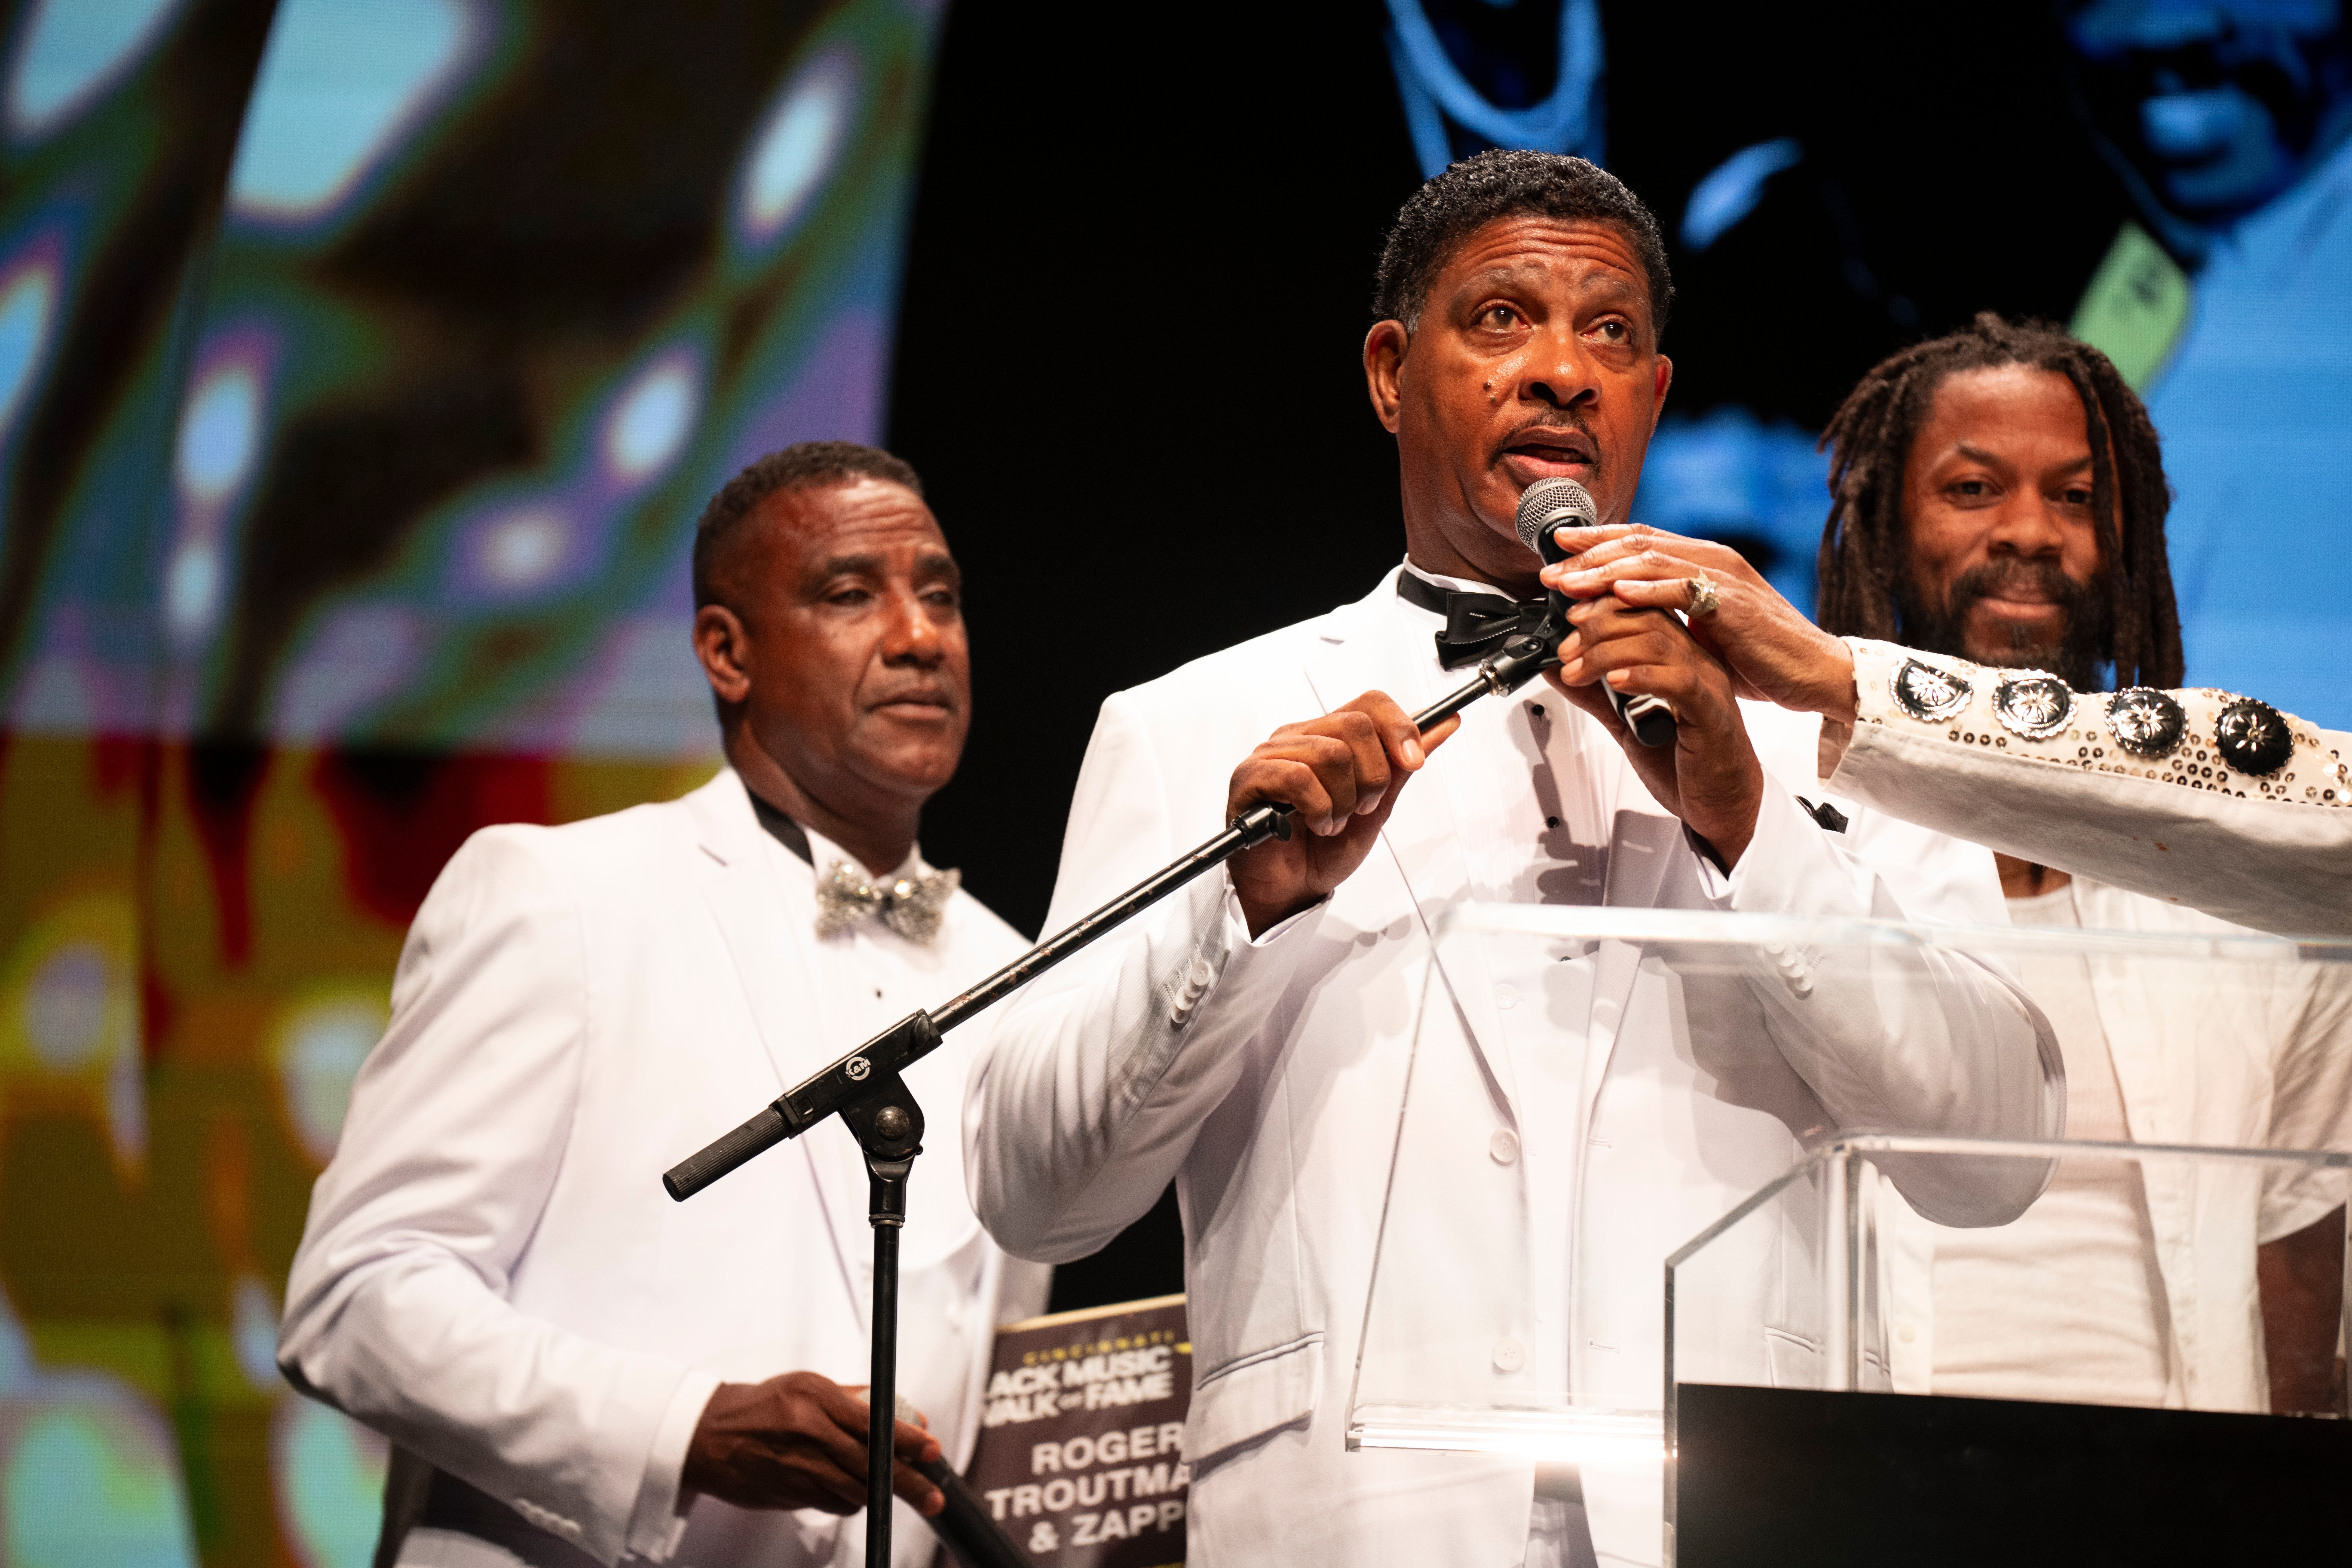 Cincinnati Black Music Walk of Fame honors artists for attraction's one-year anniversary